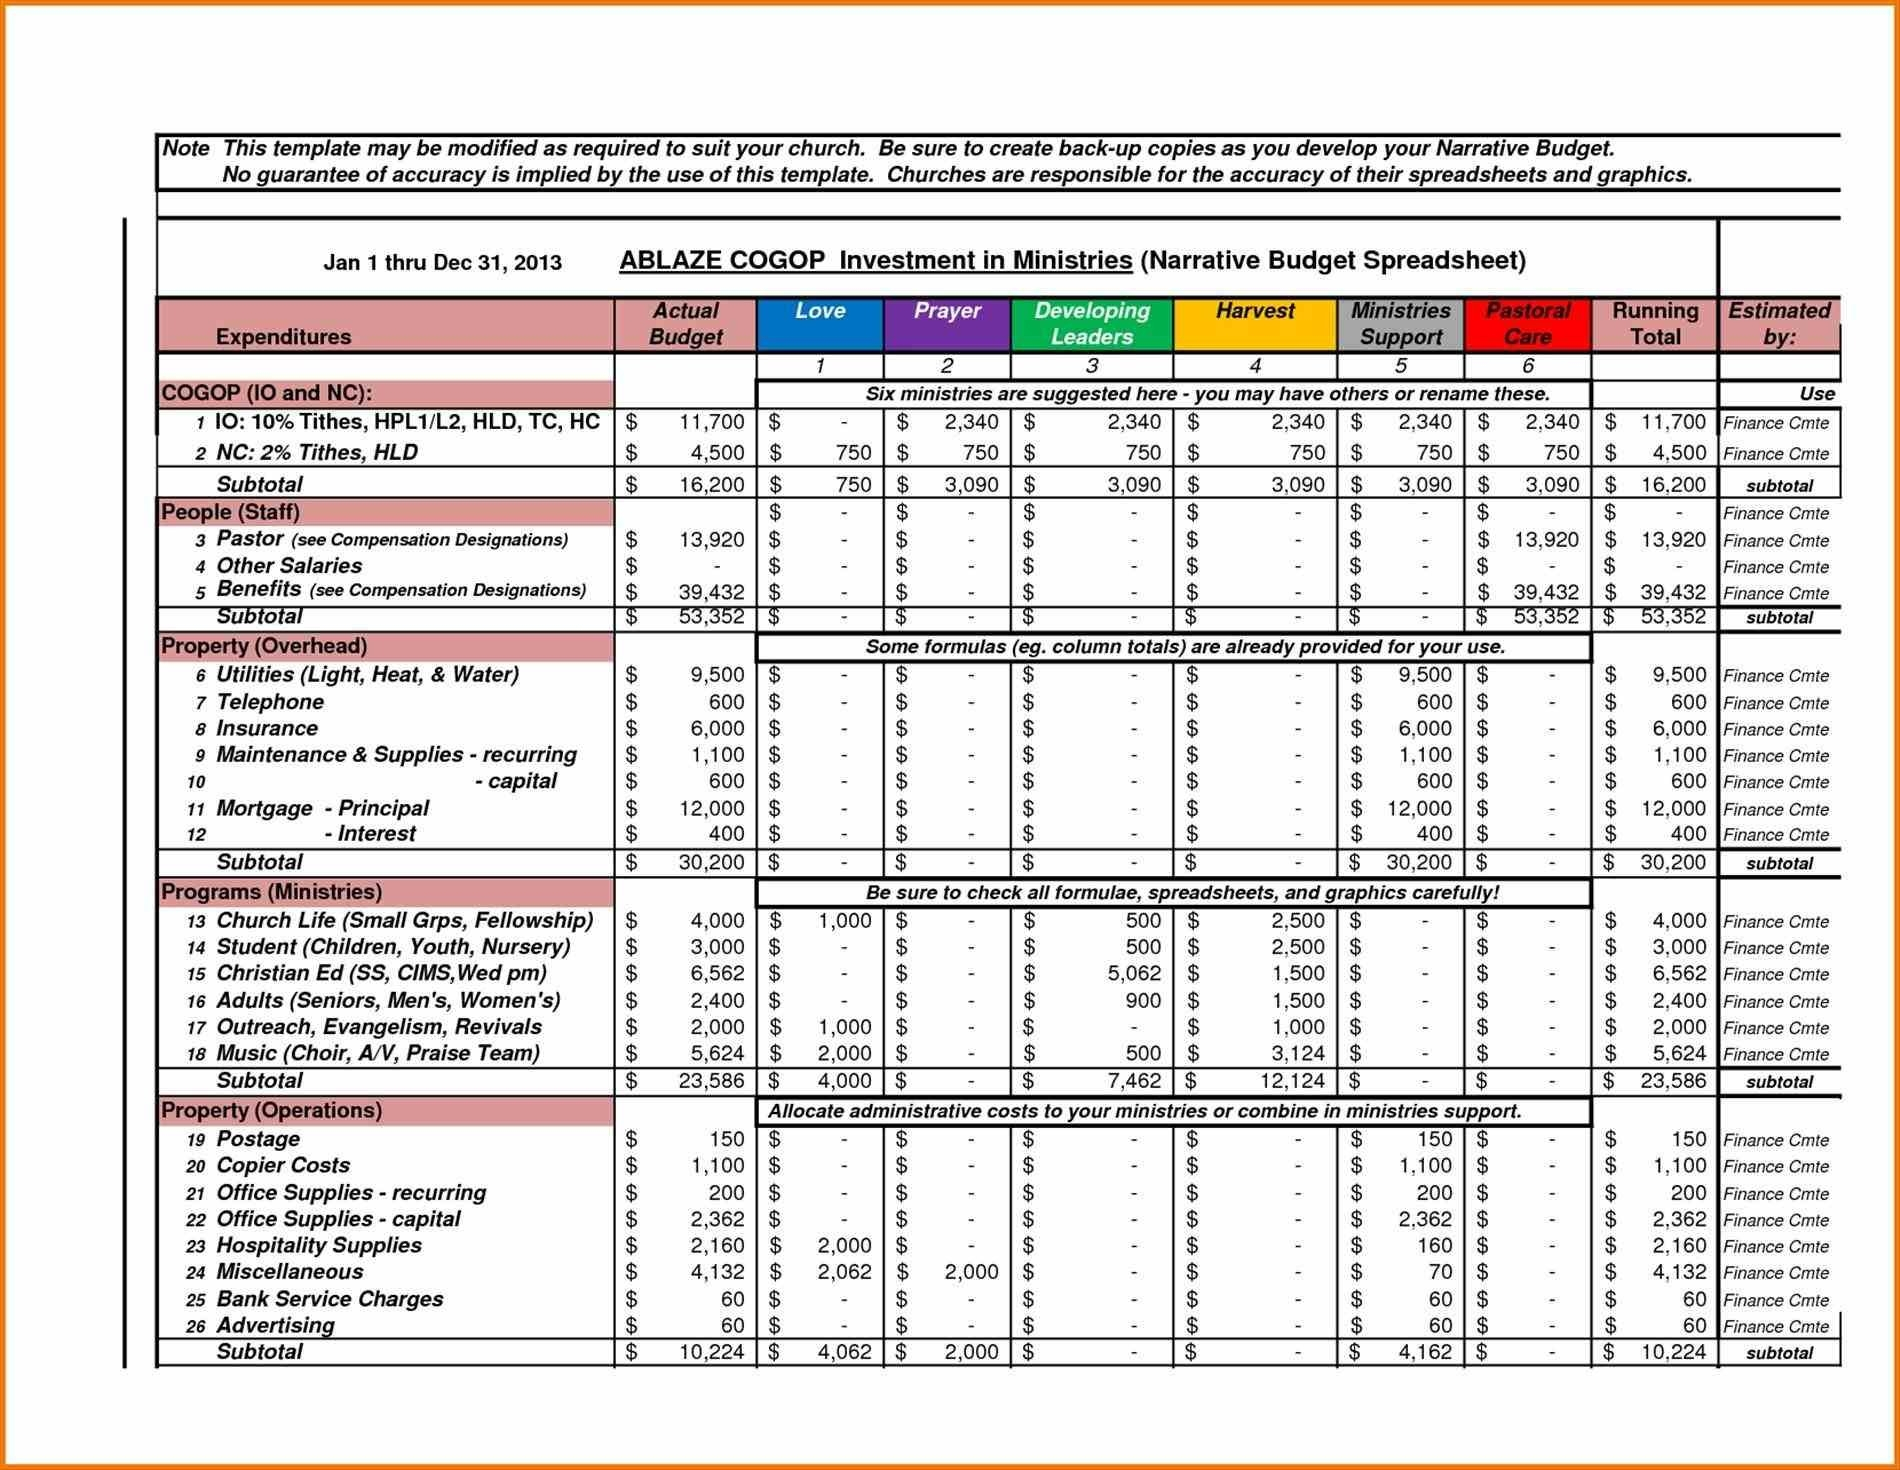 001 Annual Business Budget Template Excel 20sample Spreadsheet 